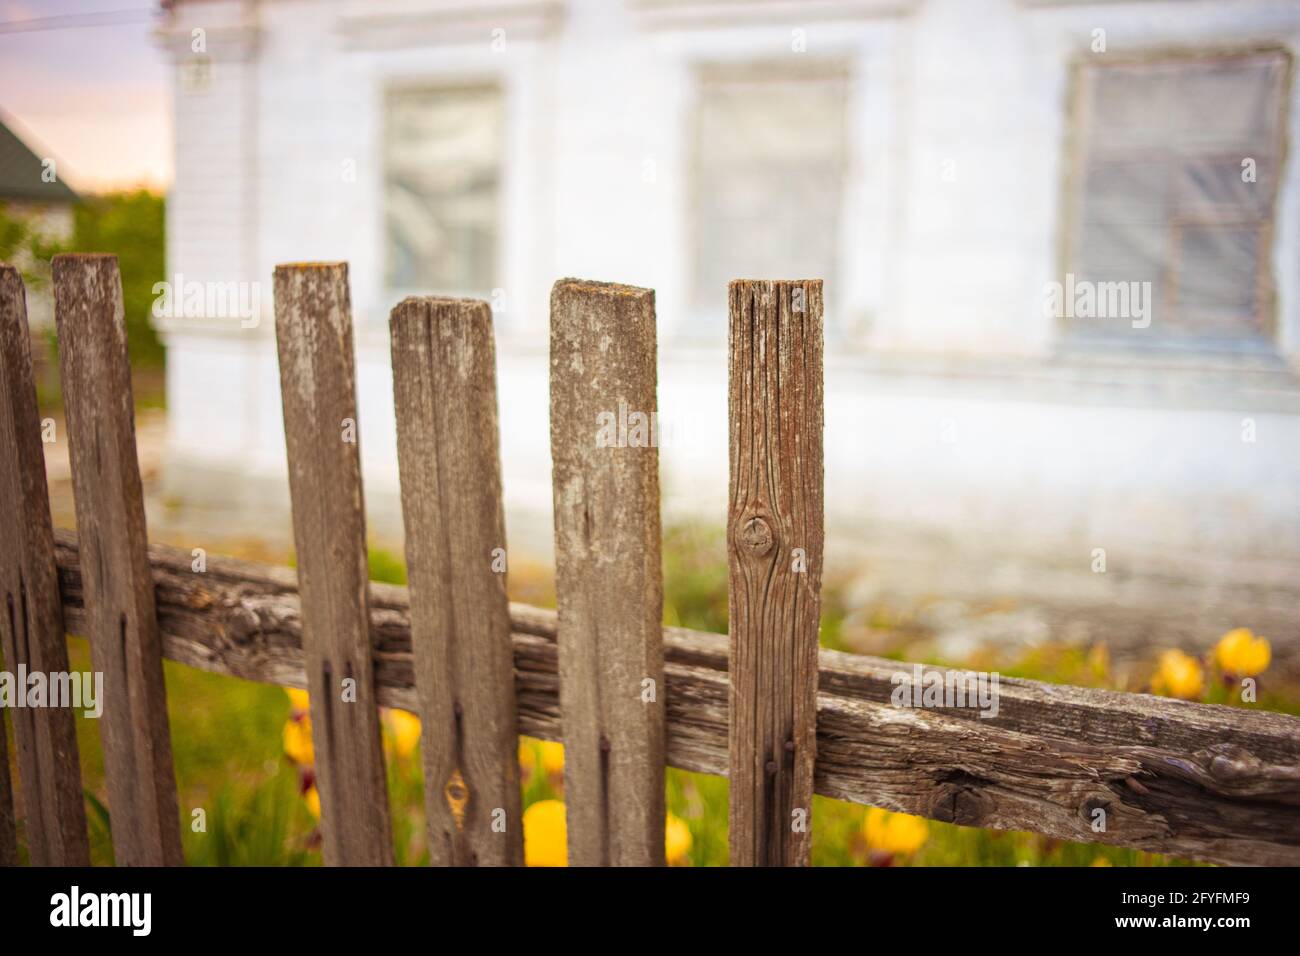 Old broken picket fence. White rural house in blurred background. Stock Photo